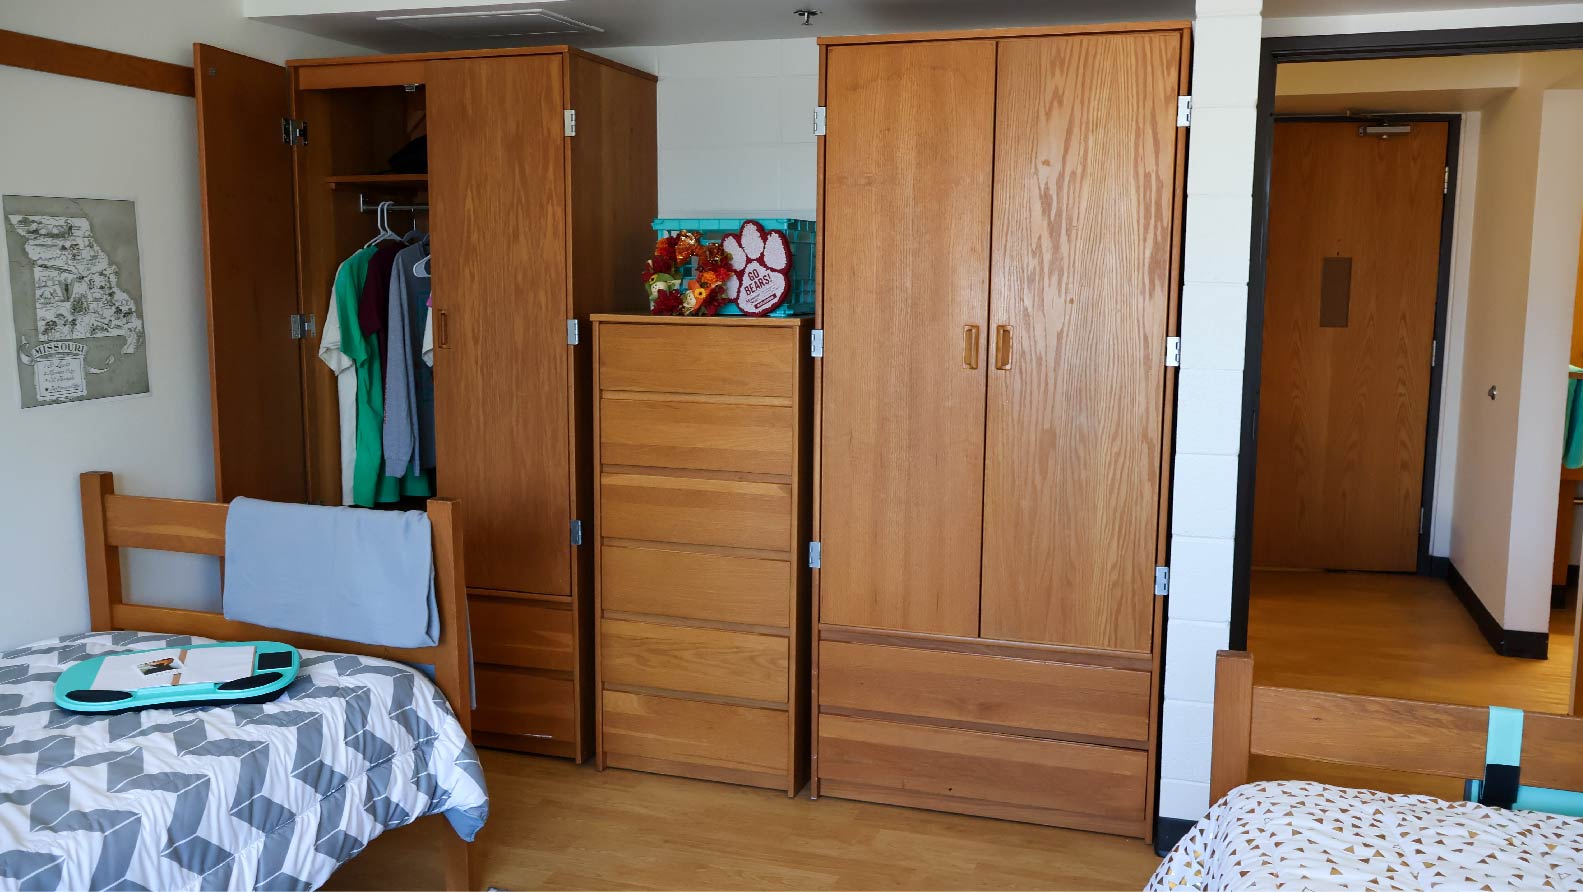 Hutchens Bedroom with 2 wardrobes and set of 6 drawers